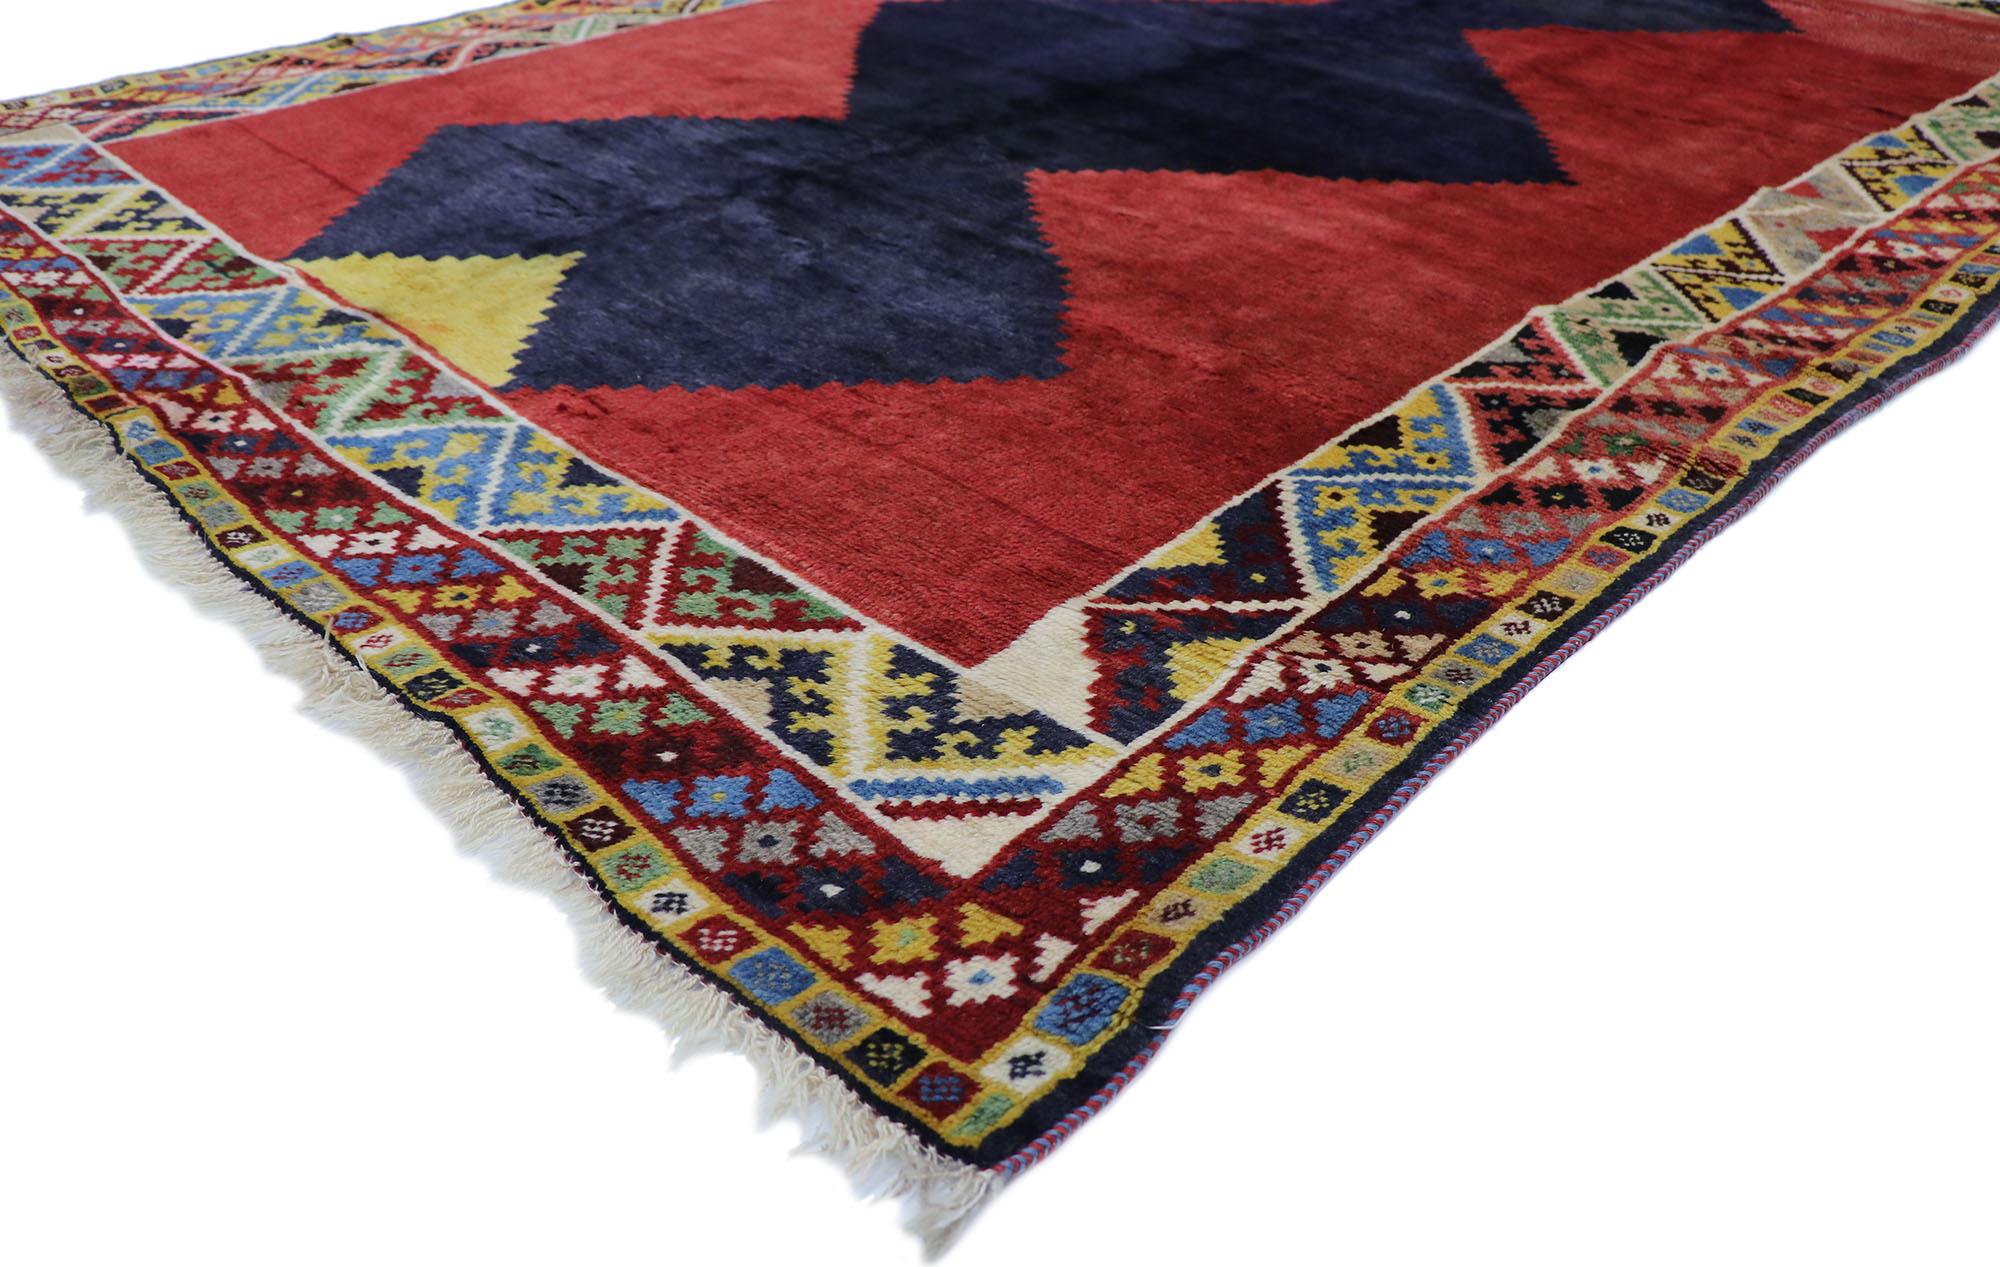 78083 vintage Persian shiraz rug with Mid-Century Modern Tribal style 06'09 x 09'09. Full of tiny details and a bold expressive design combined with vibrant colors and tribal style, this hand-knotted wool vintage Persian Shiraz rug is a captivating